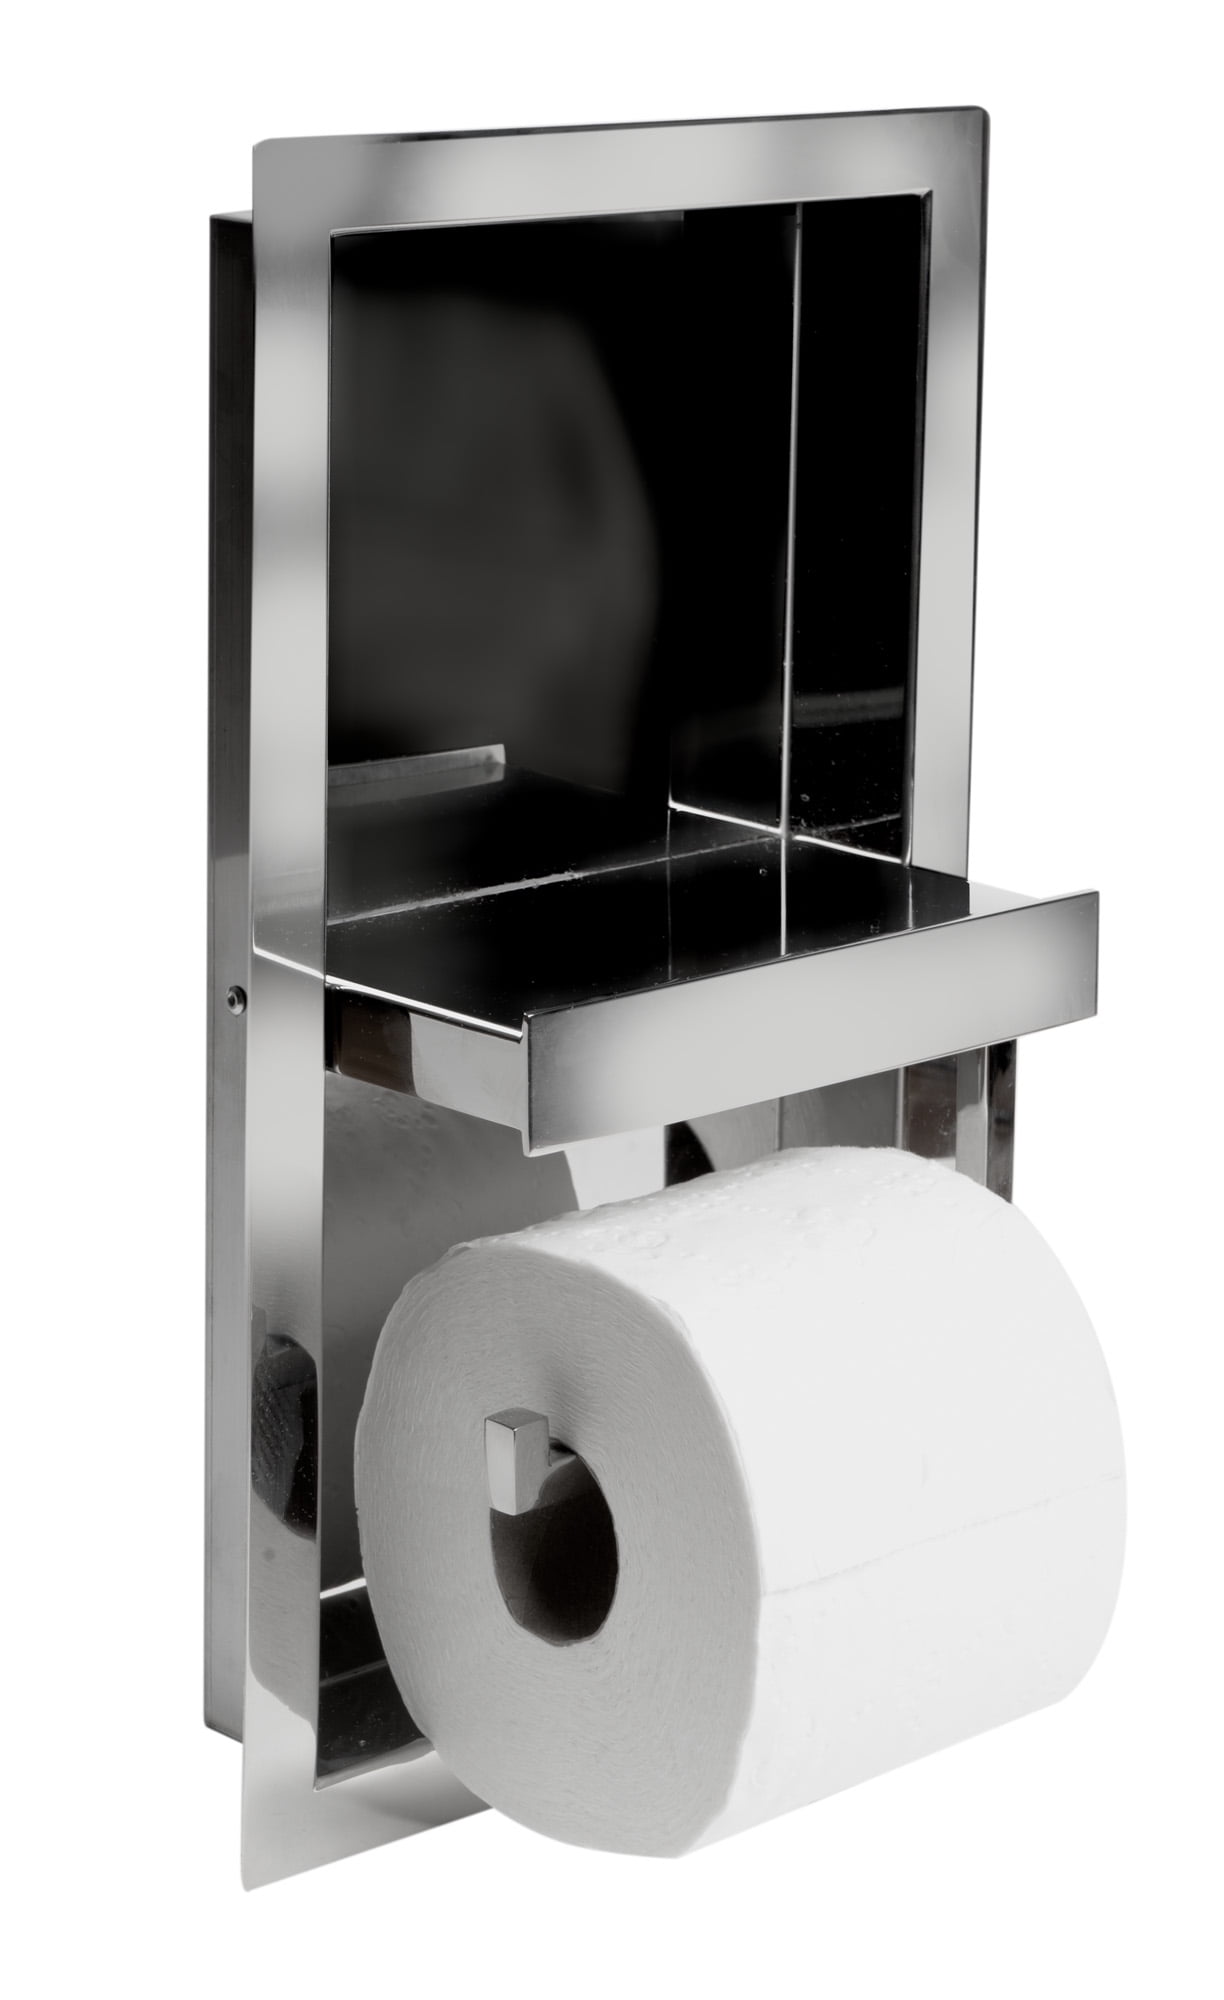 ALFI brand ABTPC77 Stainless Steel Recessed Toilet Paper Holder with Cover